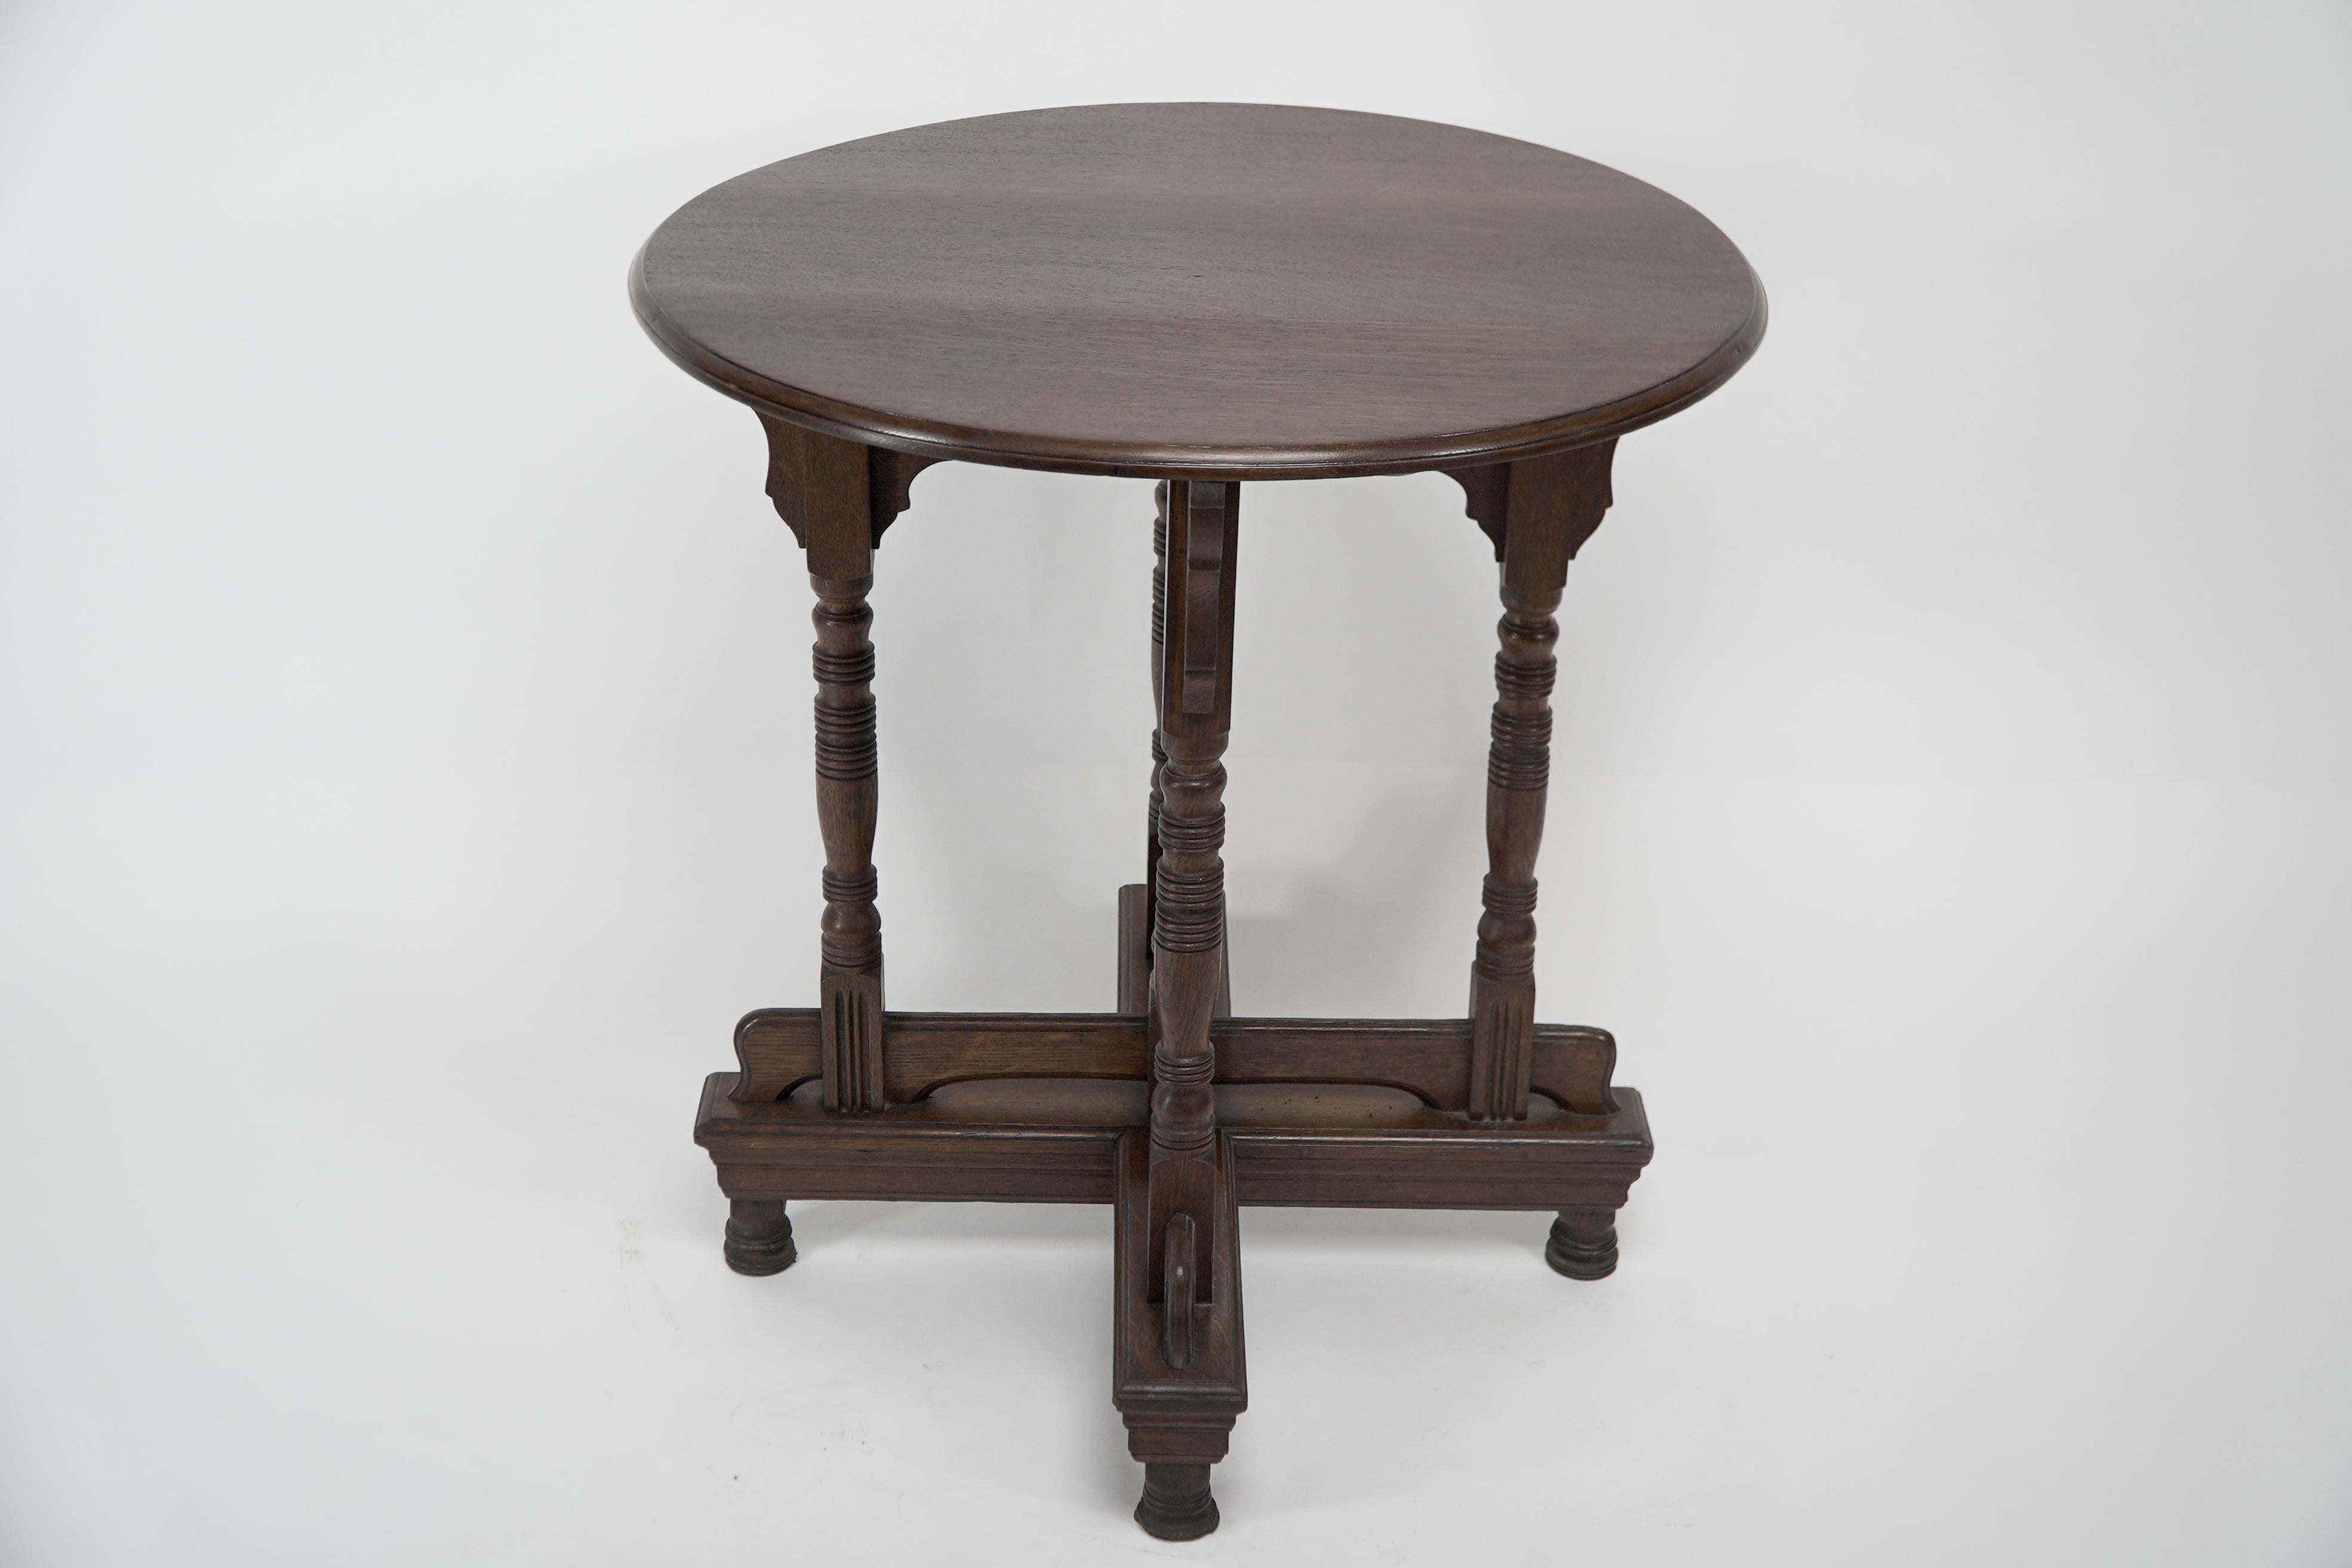 Alfred Waterhouse attributed. A Gothic Revival oak side table with unusual double cross stretchers uniting the turned legs, the upper cross stretcher with a turned finial to the center on turned stub feet.